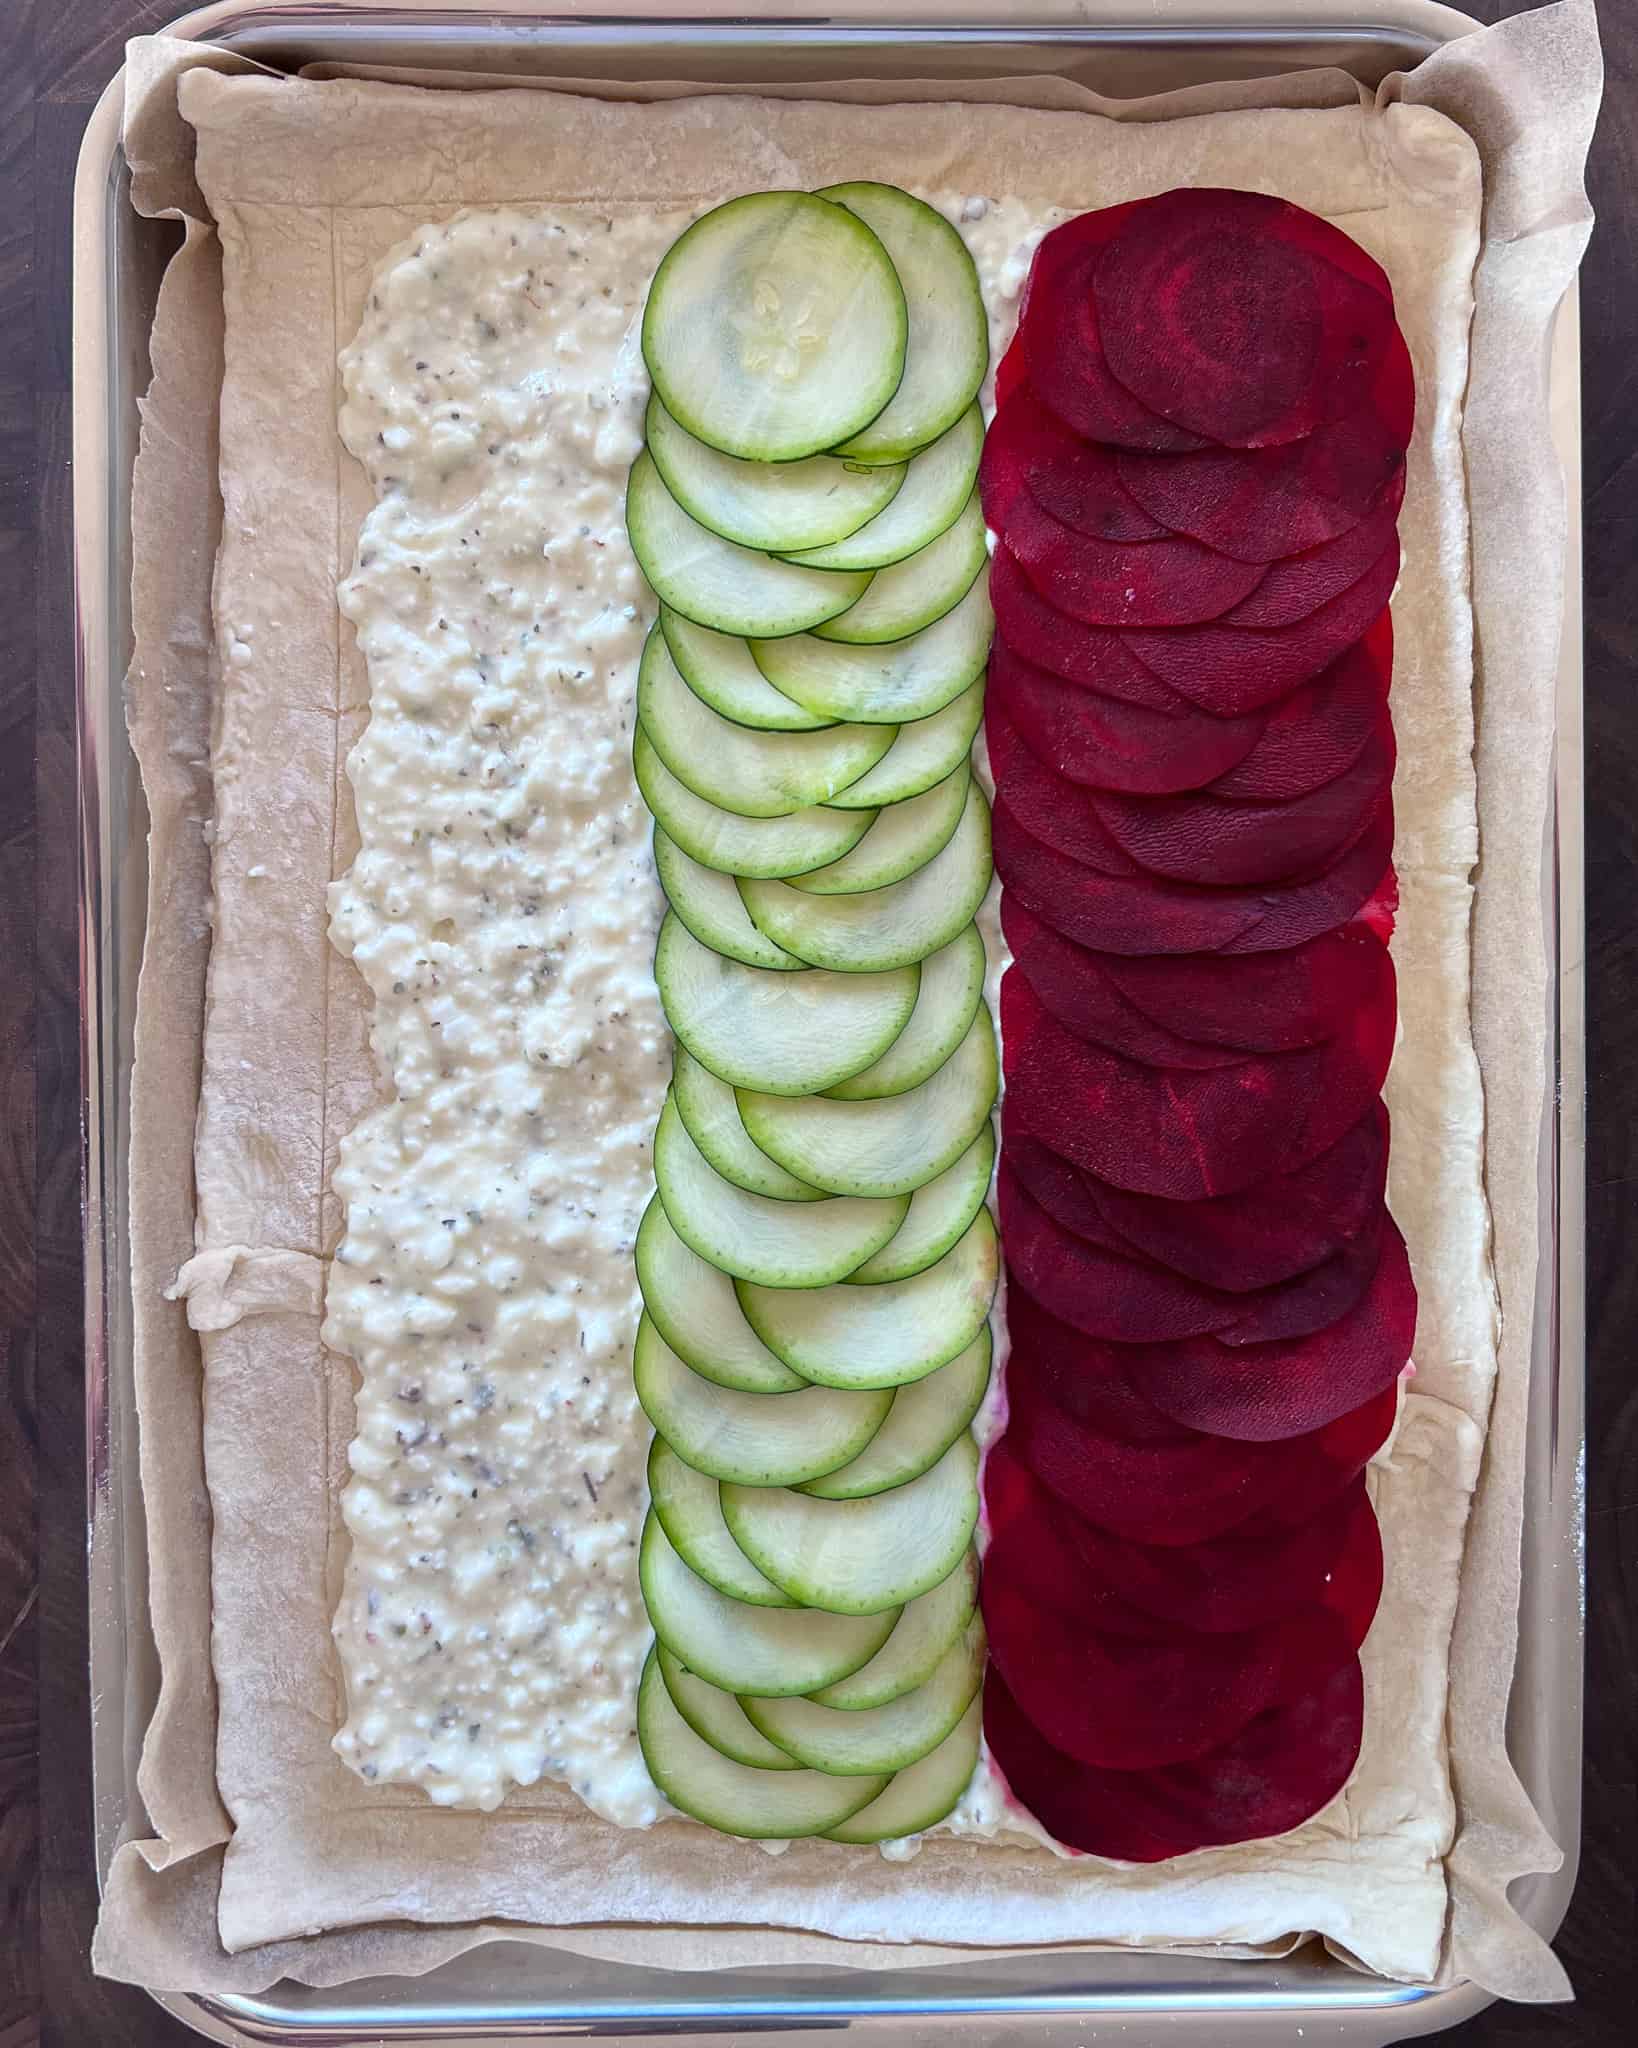 A row of zucchini and beets laid over the cheese layer on the puff pastry.